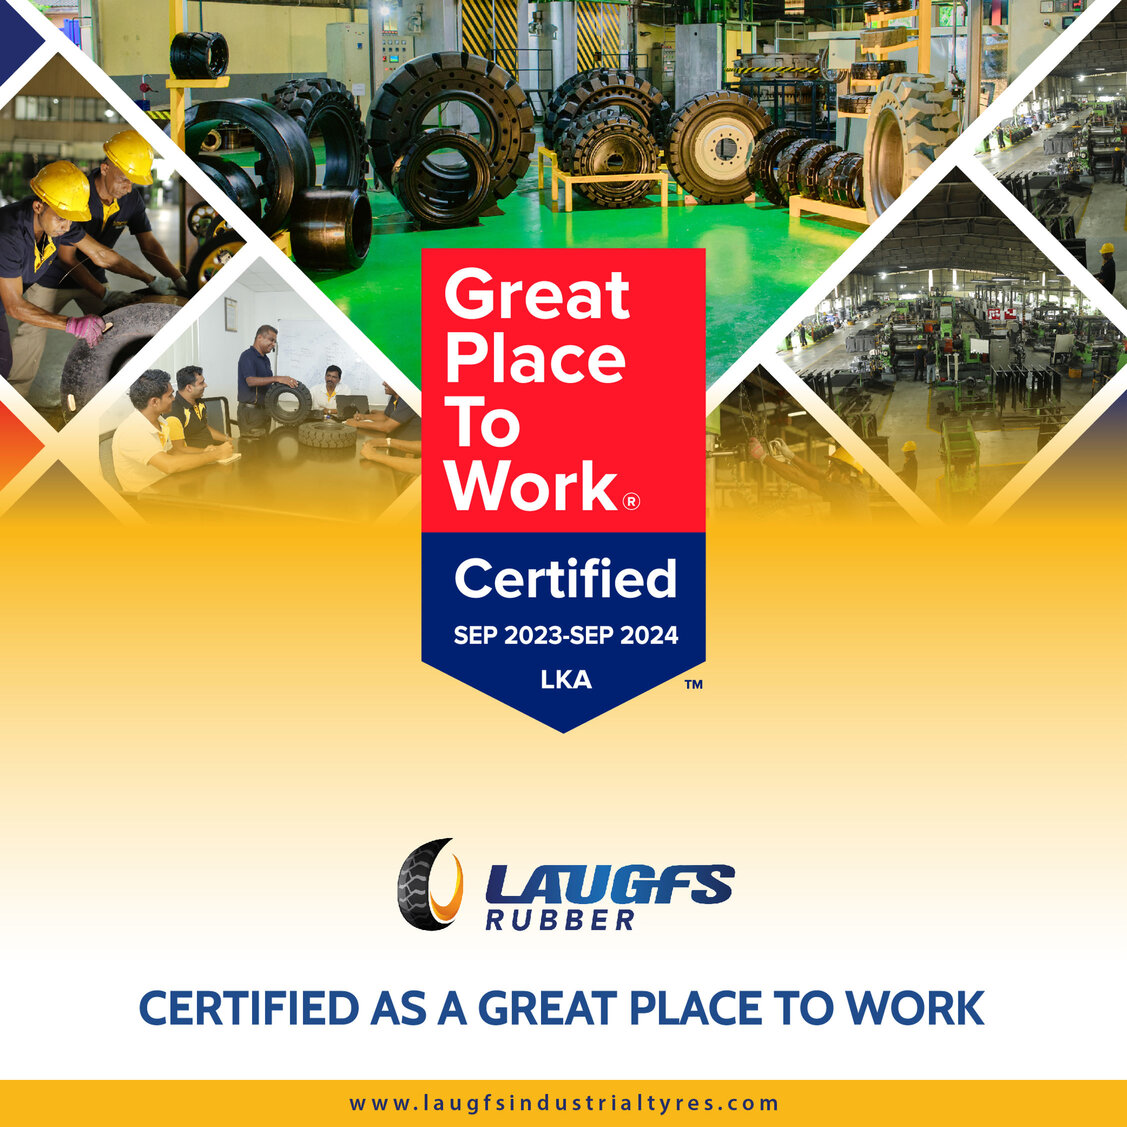 LAUGFS Rubber Named Great Place to Work